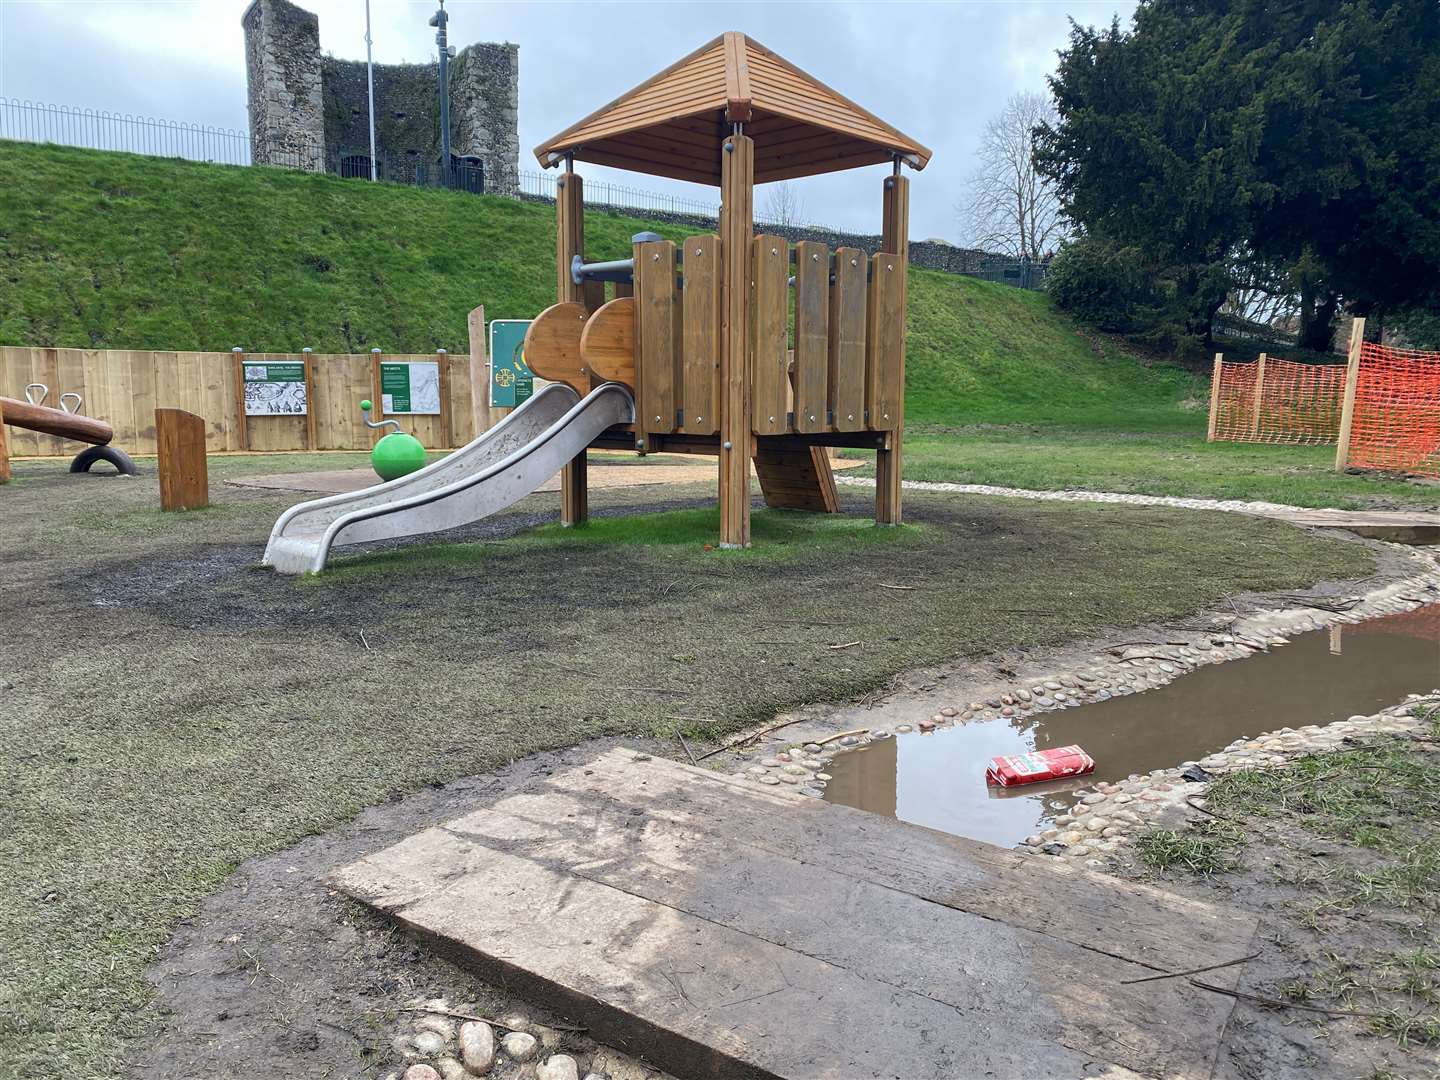 The playground at Dane John Gardens in Canterbury has been branded a "muddy mess" just days after opening